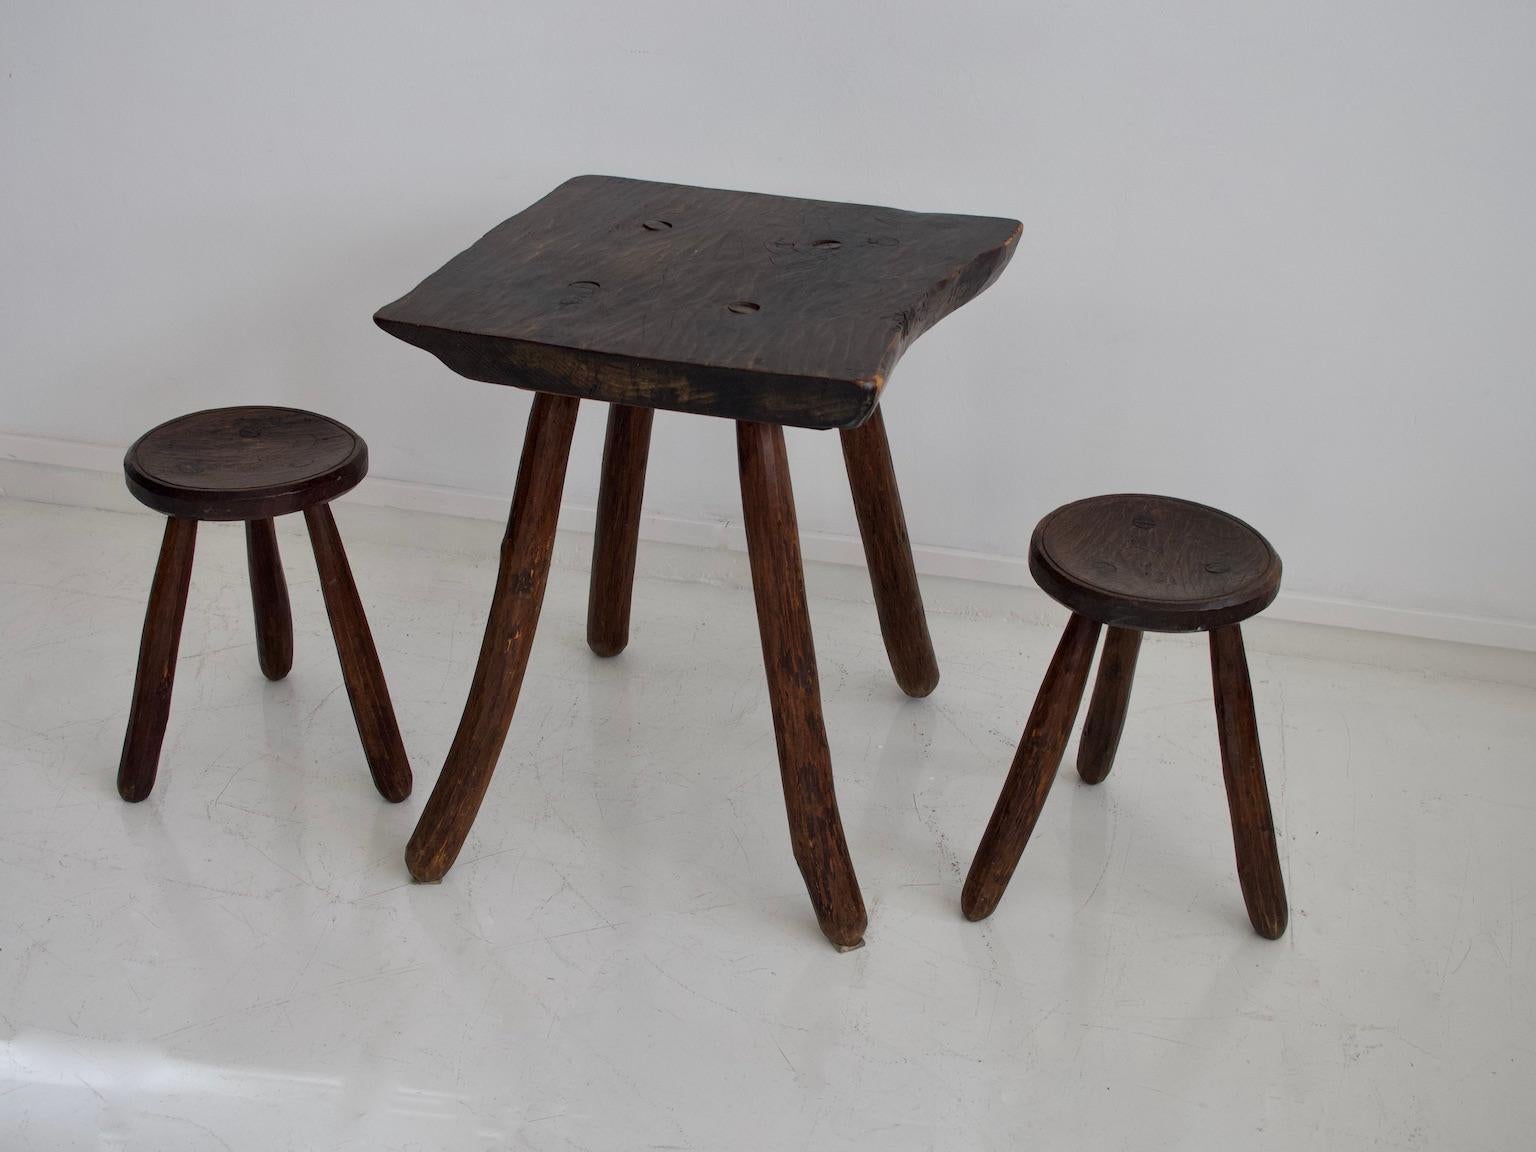 French Rustic Table and Two Tripod Stools of Profiled Wood Logs